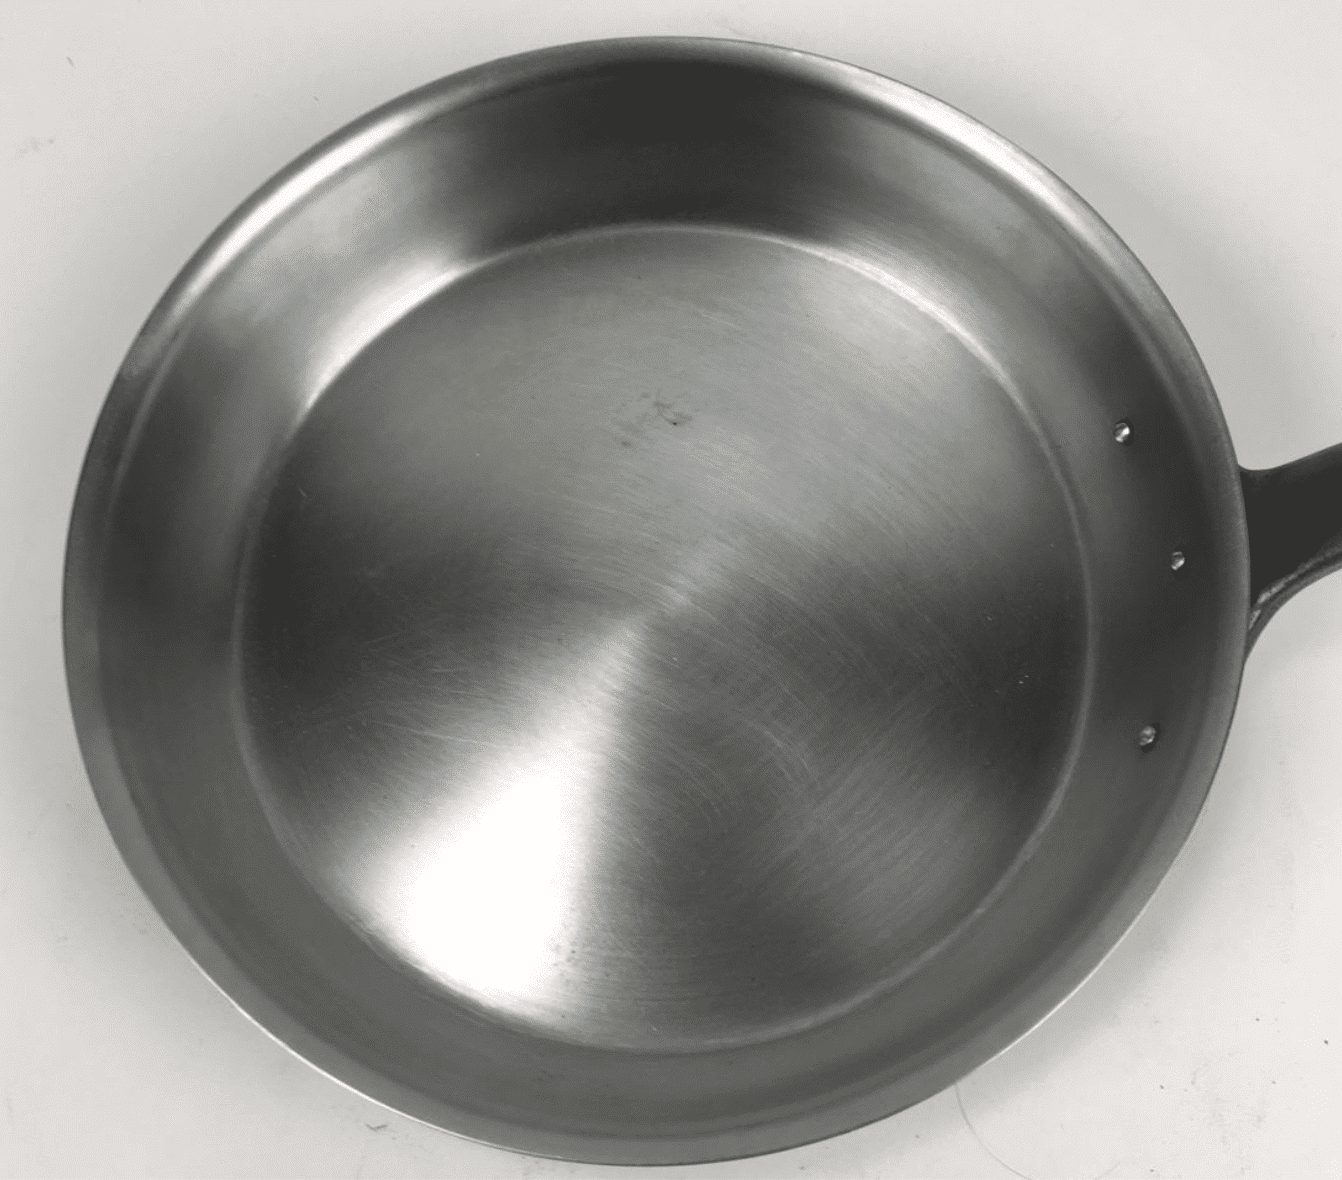 Interior finishes on stainless-lined pans